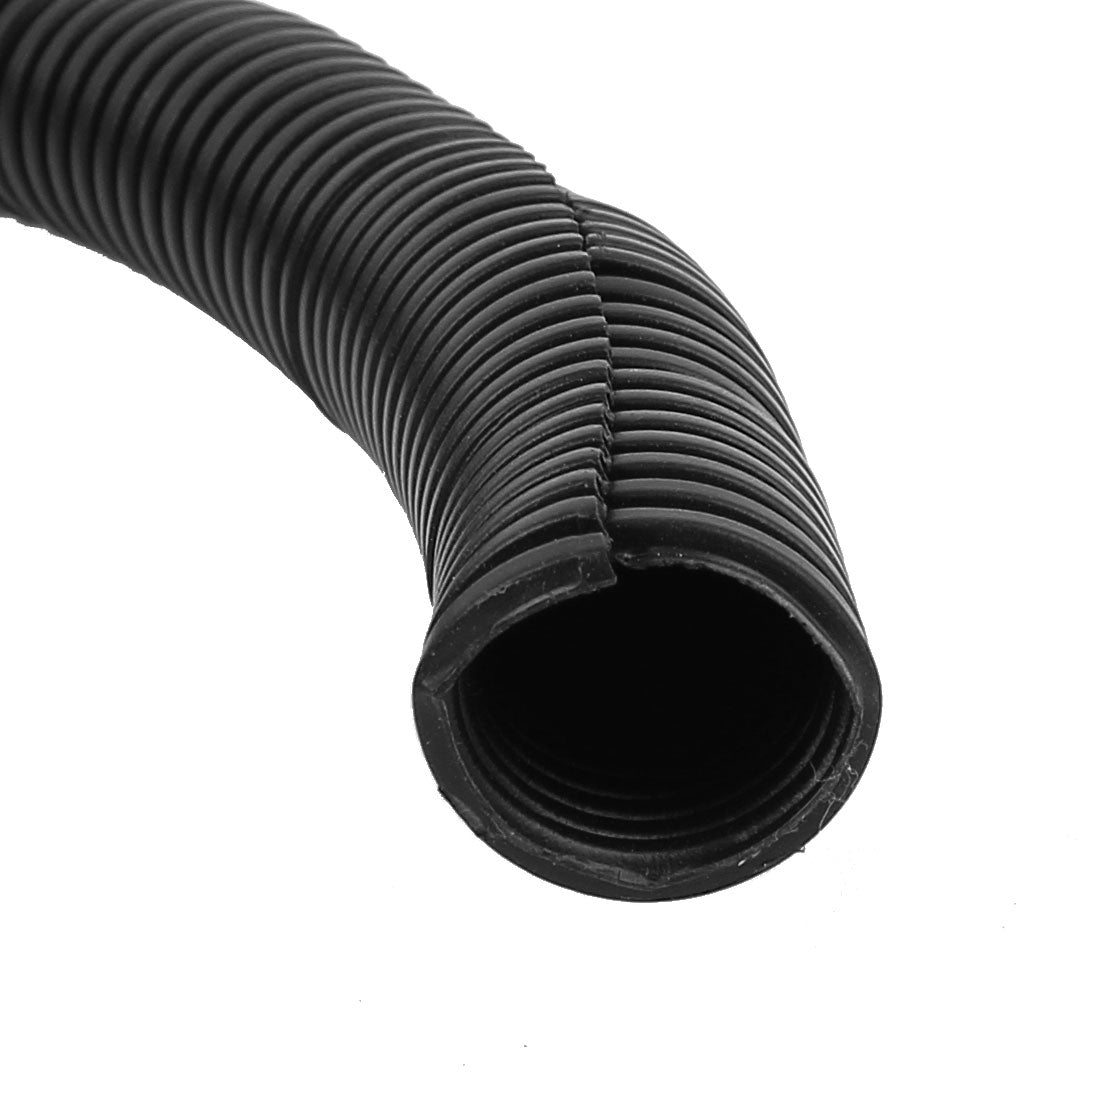 uxcell Uxcell 5 M 17 x 21.5 mm Plastic Split Corrugated Conduit Tube for Garden,Office Black